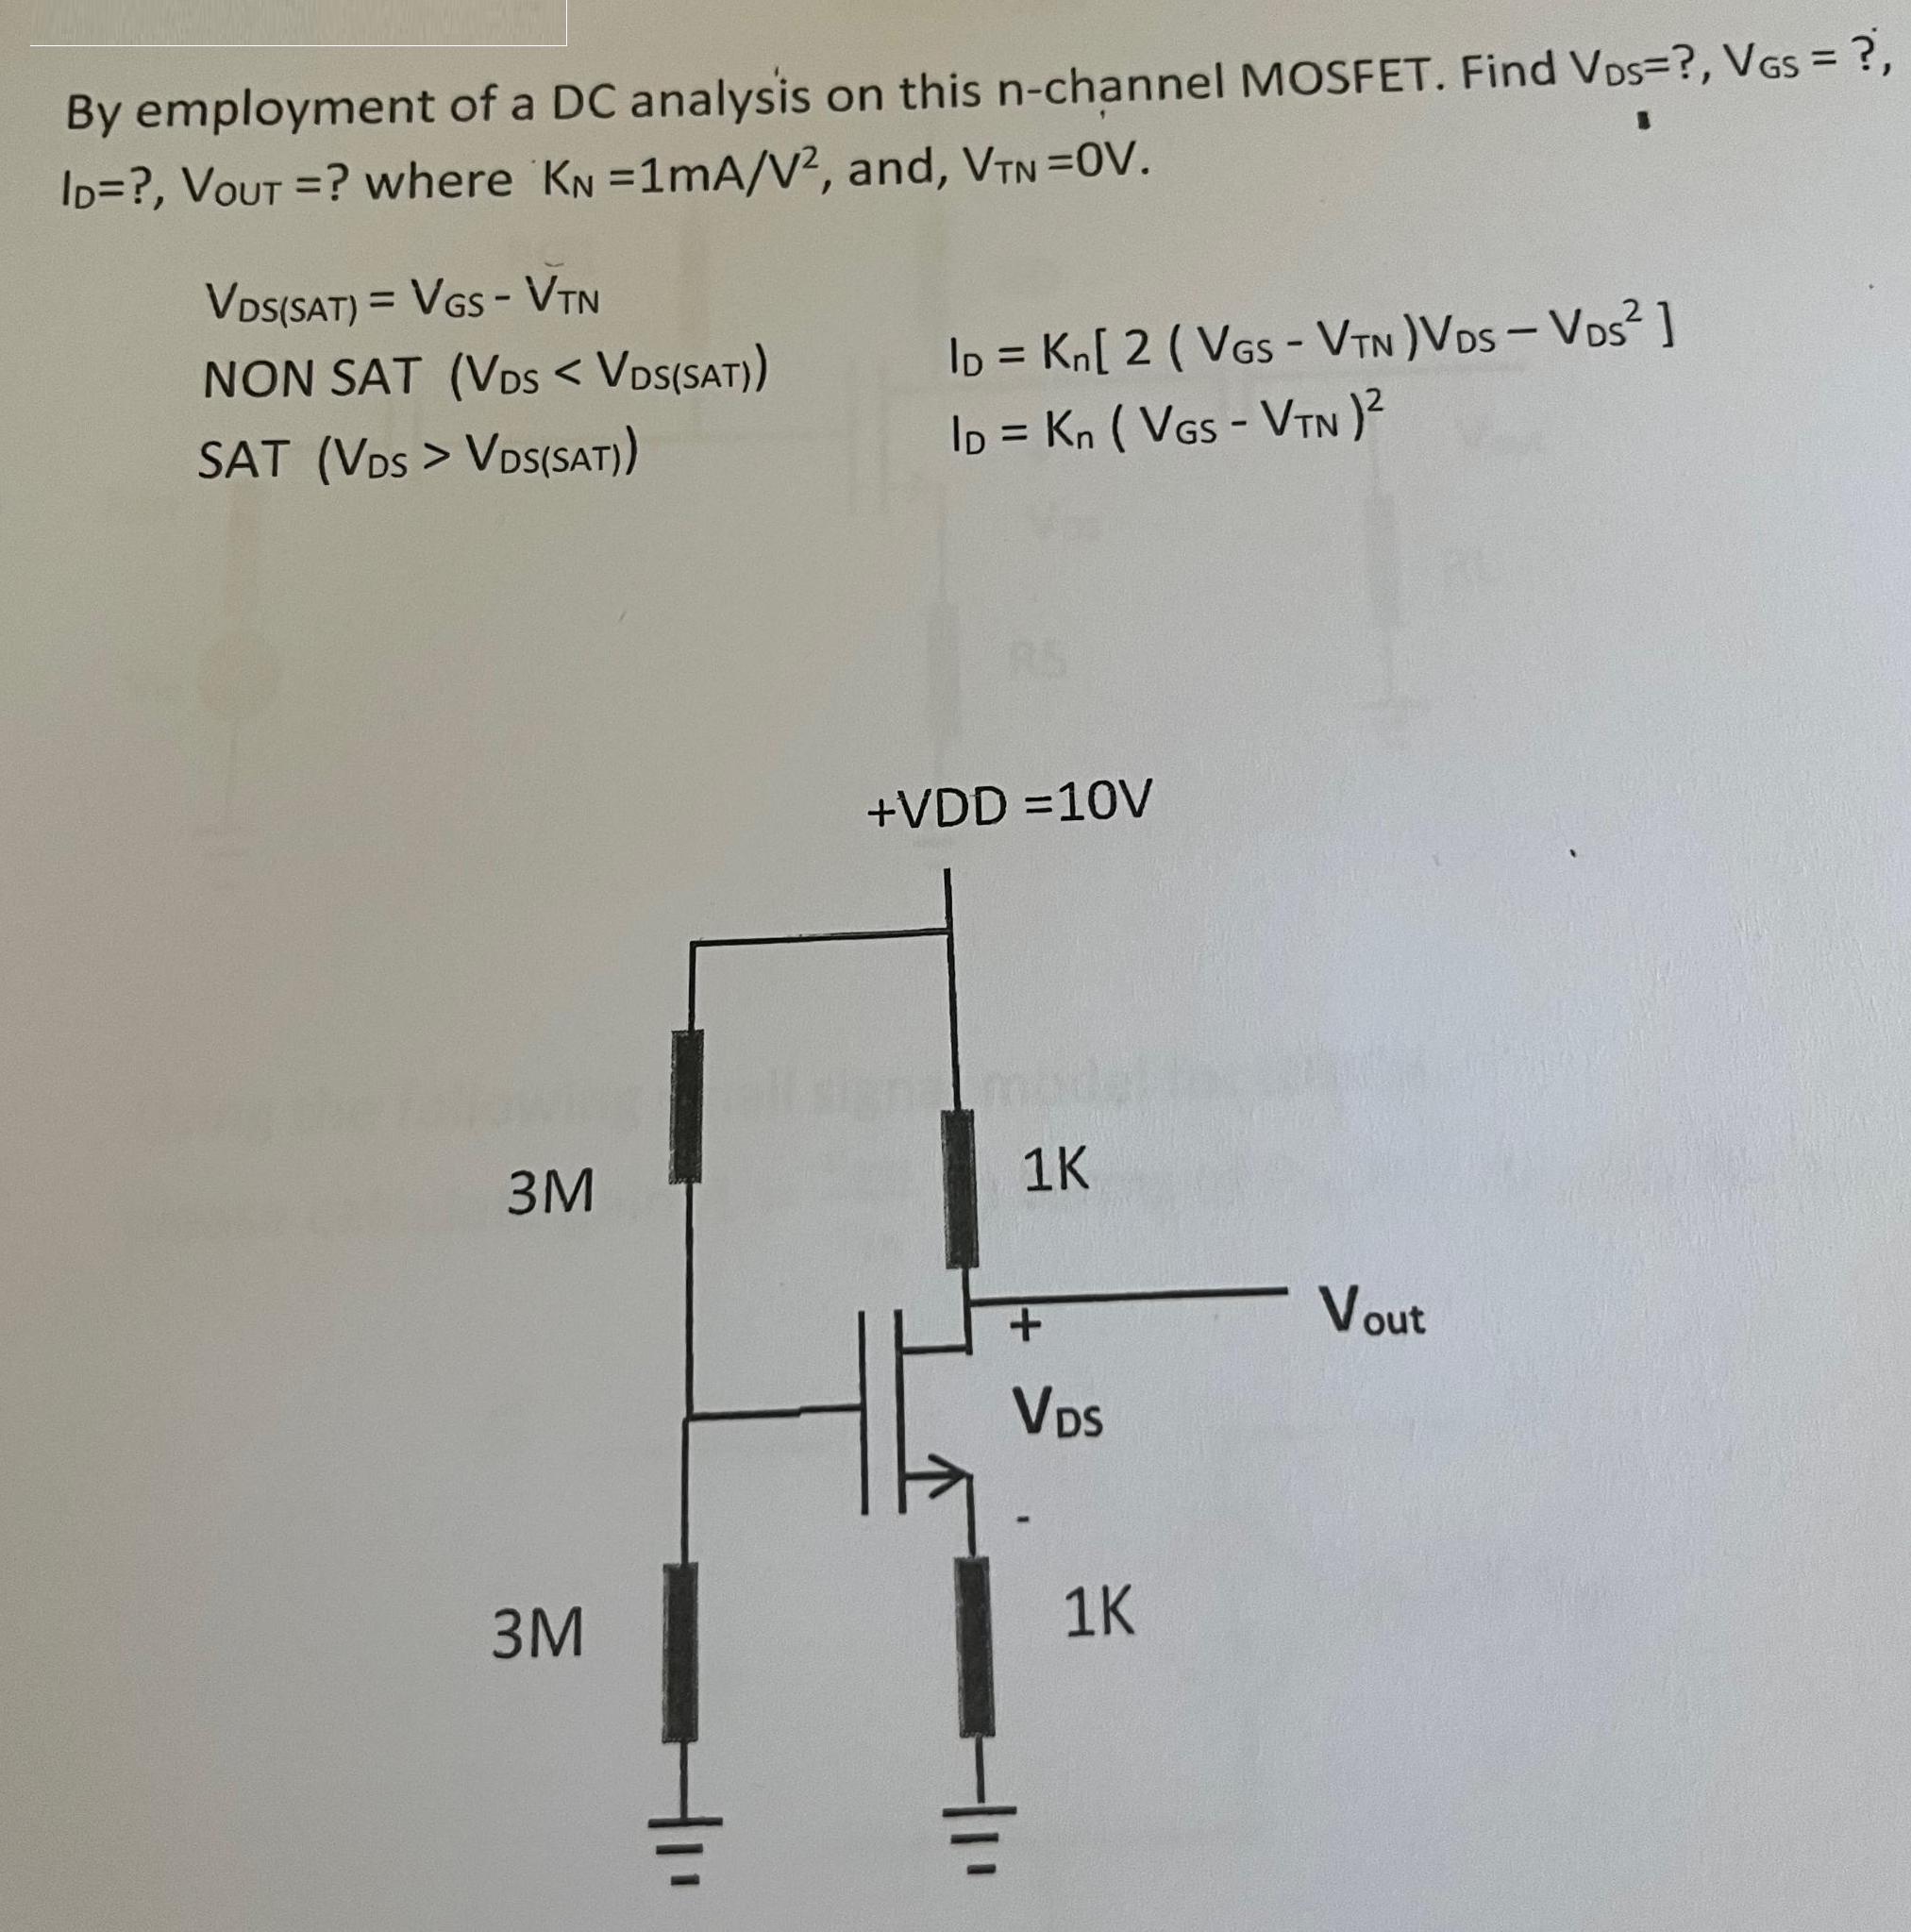 By employment of a DC analysis on this n-channel MOSFET. Find Vos=?, VGS = ?, ID=?, VoUT =? where KN=1mA/V2,